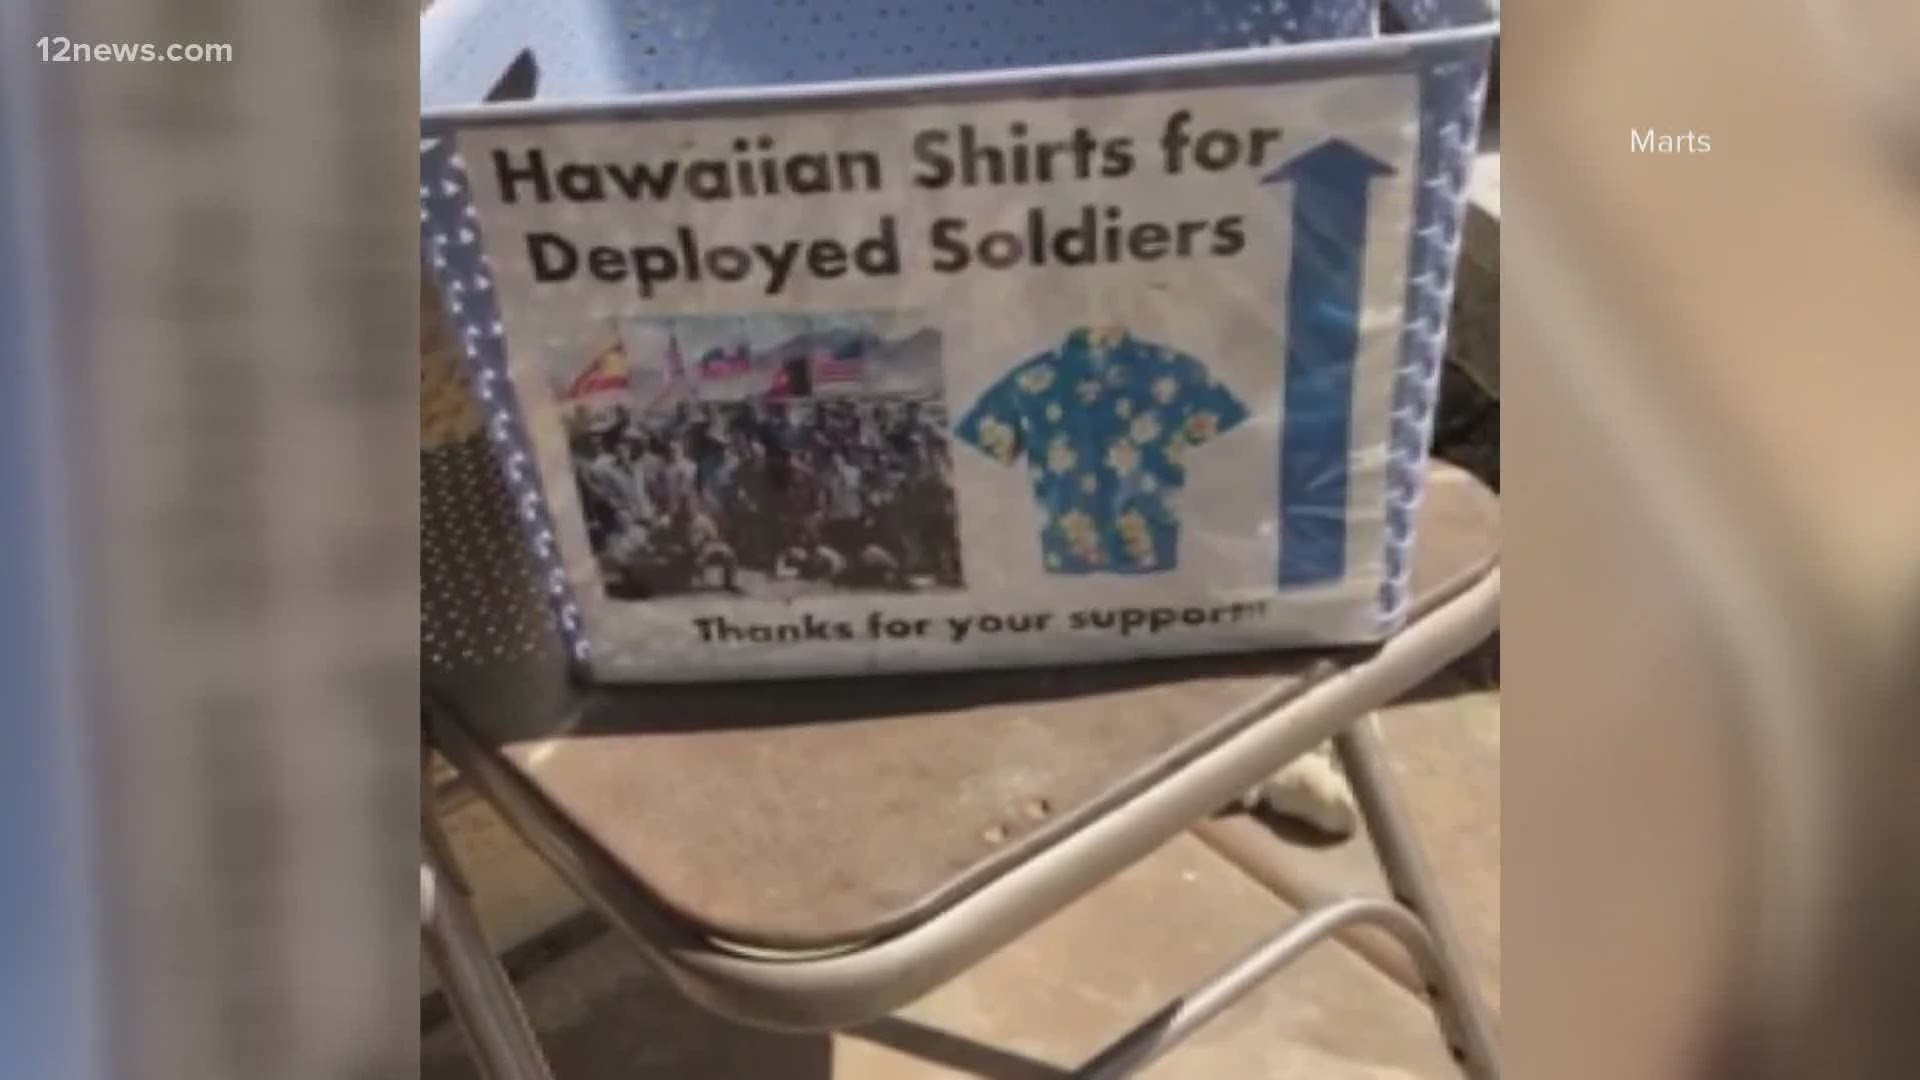 An Arizona family is part of an effort sending shirts to troops overseas. Team 12's Jen Wahl has the latest.